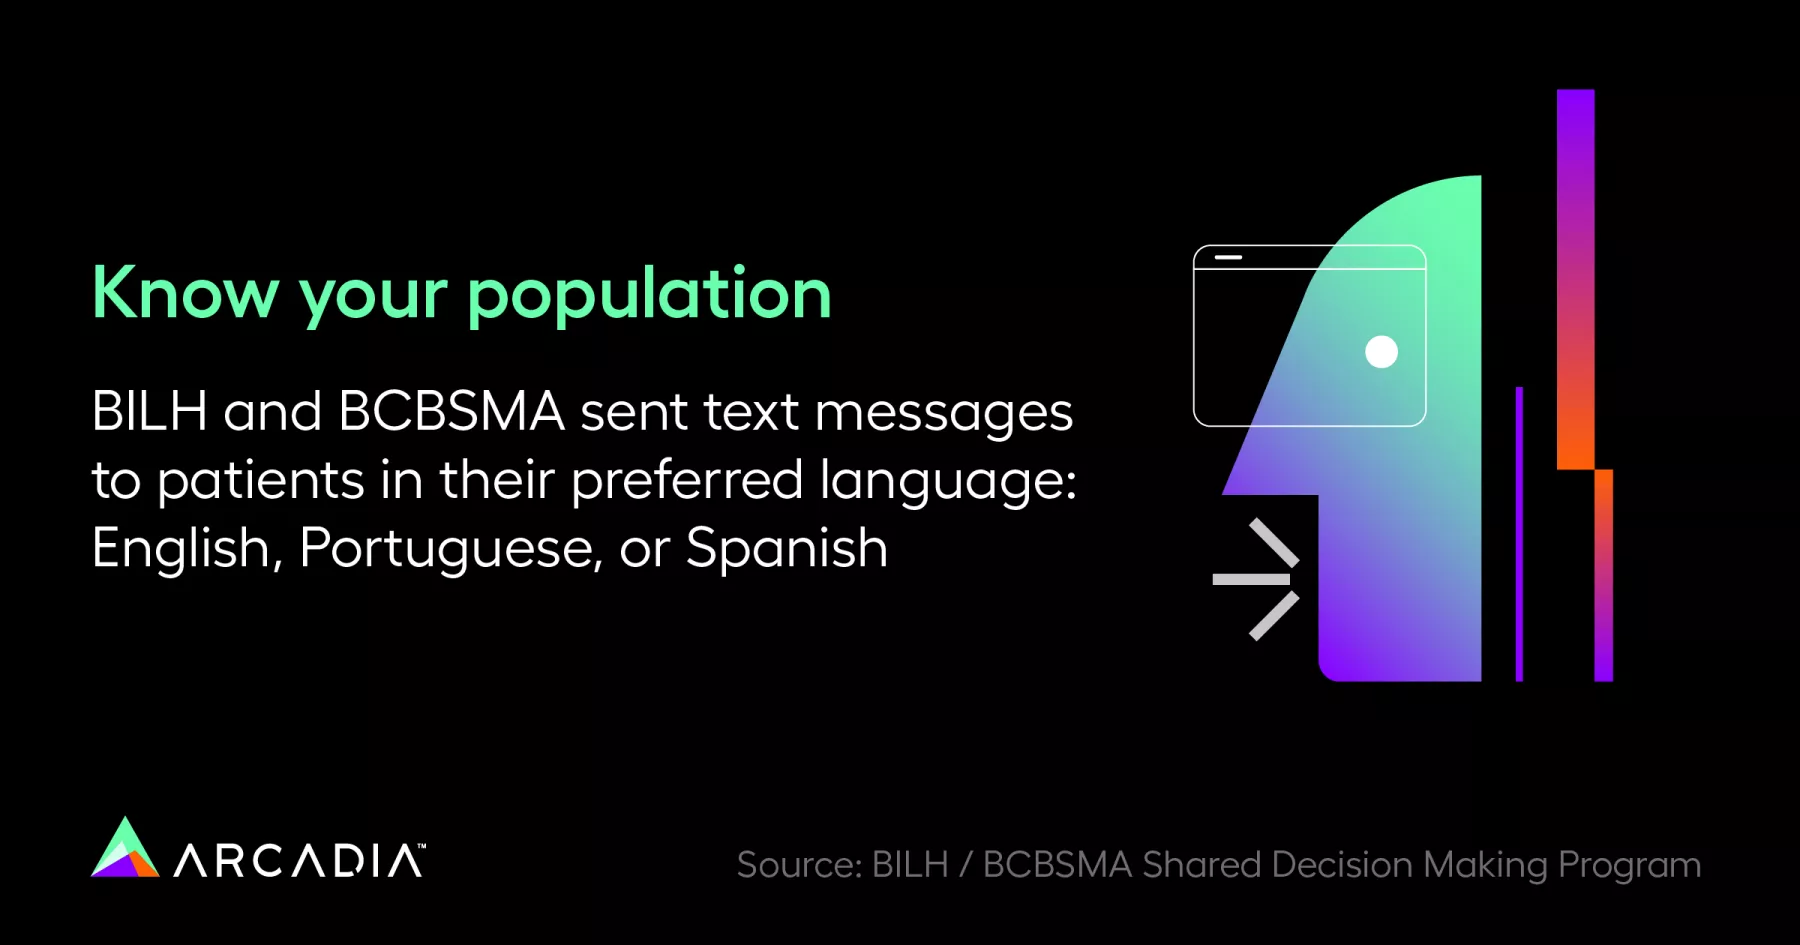 BILH and BCBSMA sent test messages to patients in their preferred language: English, Portuguese, or Spanish.